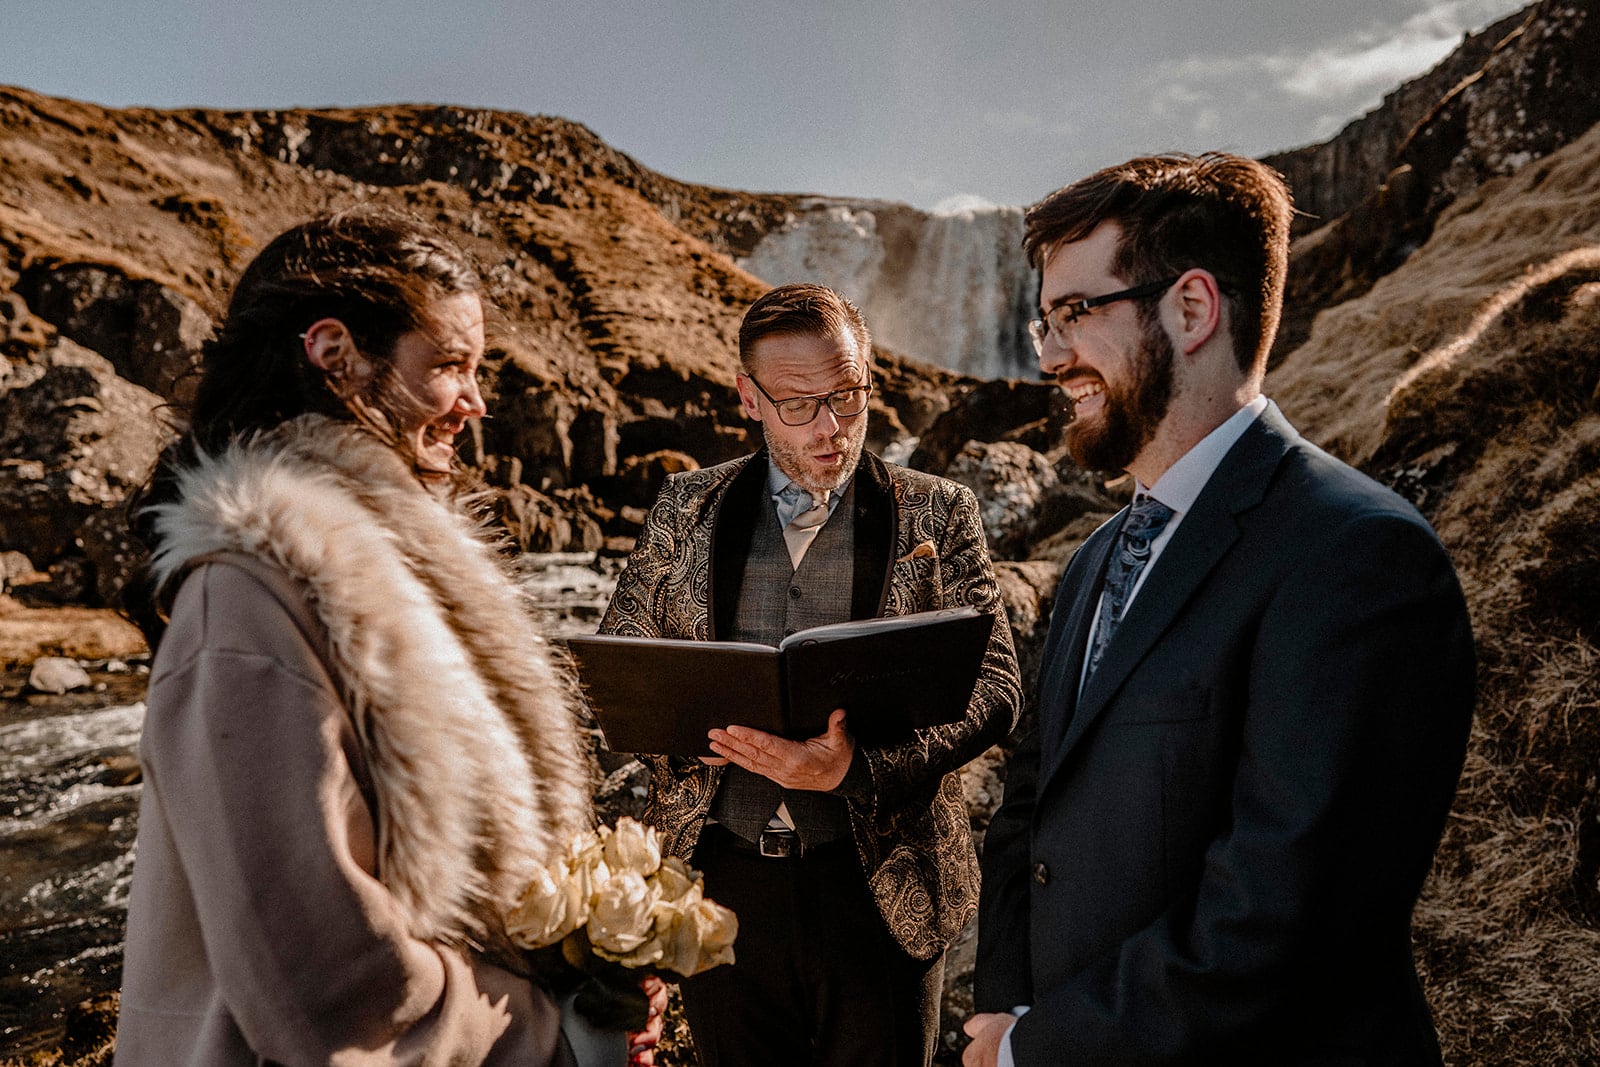 Western Iceland's Magnificence: Bride and Groom's Love Story Unfolding